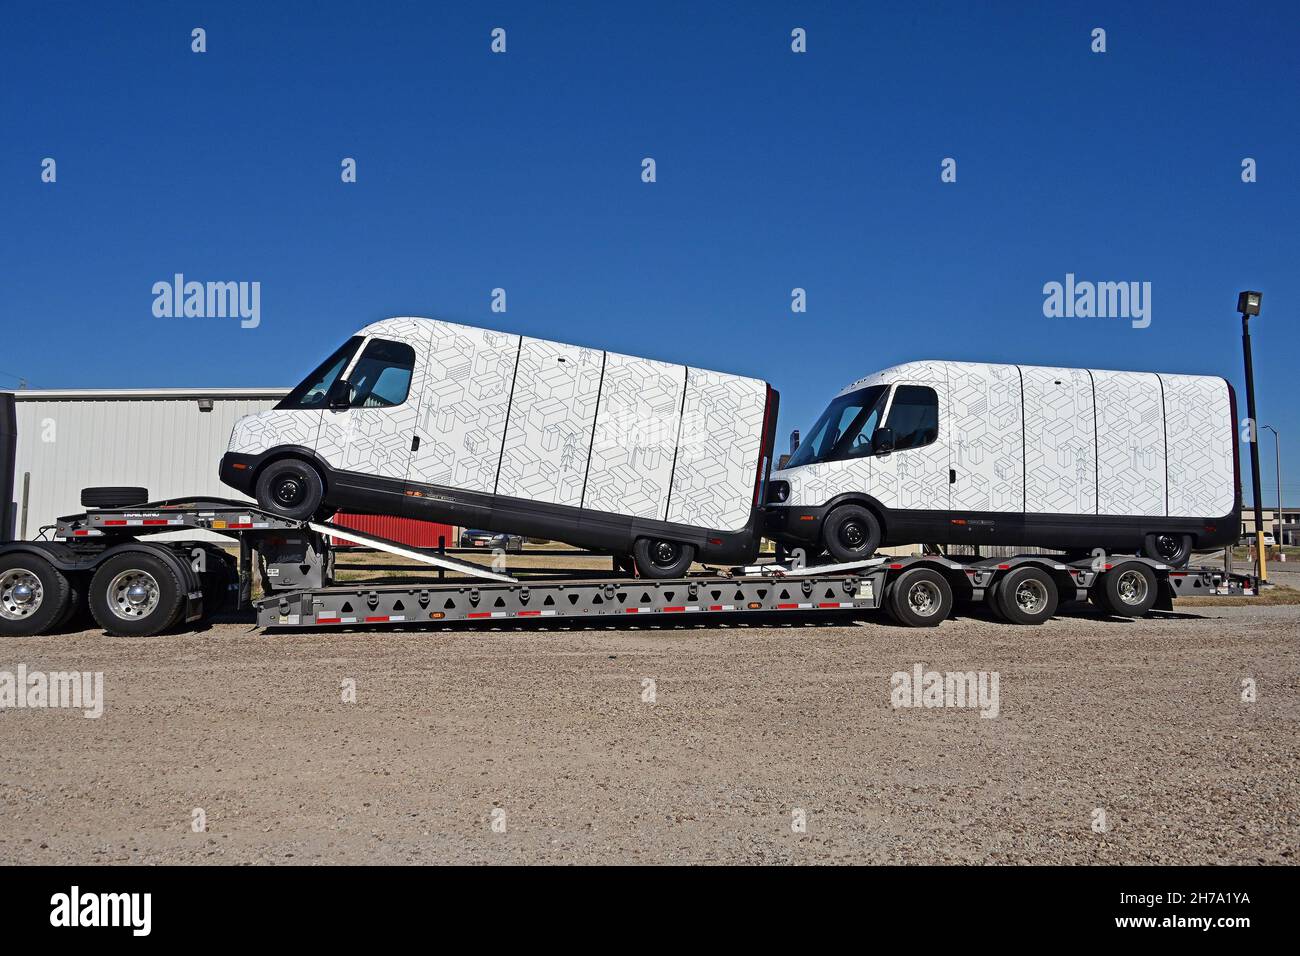 Two brand new model EDV 500 Rivian Electric Delivery Vans (EDV) part of the fleet order for Amazon on the back of a transportation lowboy truck parked in the Knights Inn Motel while  traveling from the production plant in Normal Illinois to their final destination Stock Photo